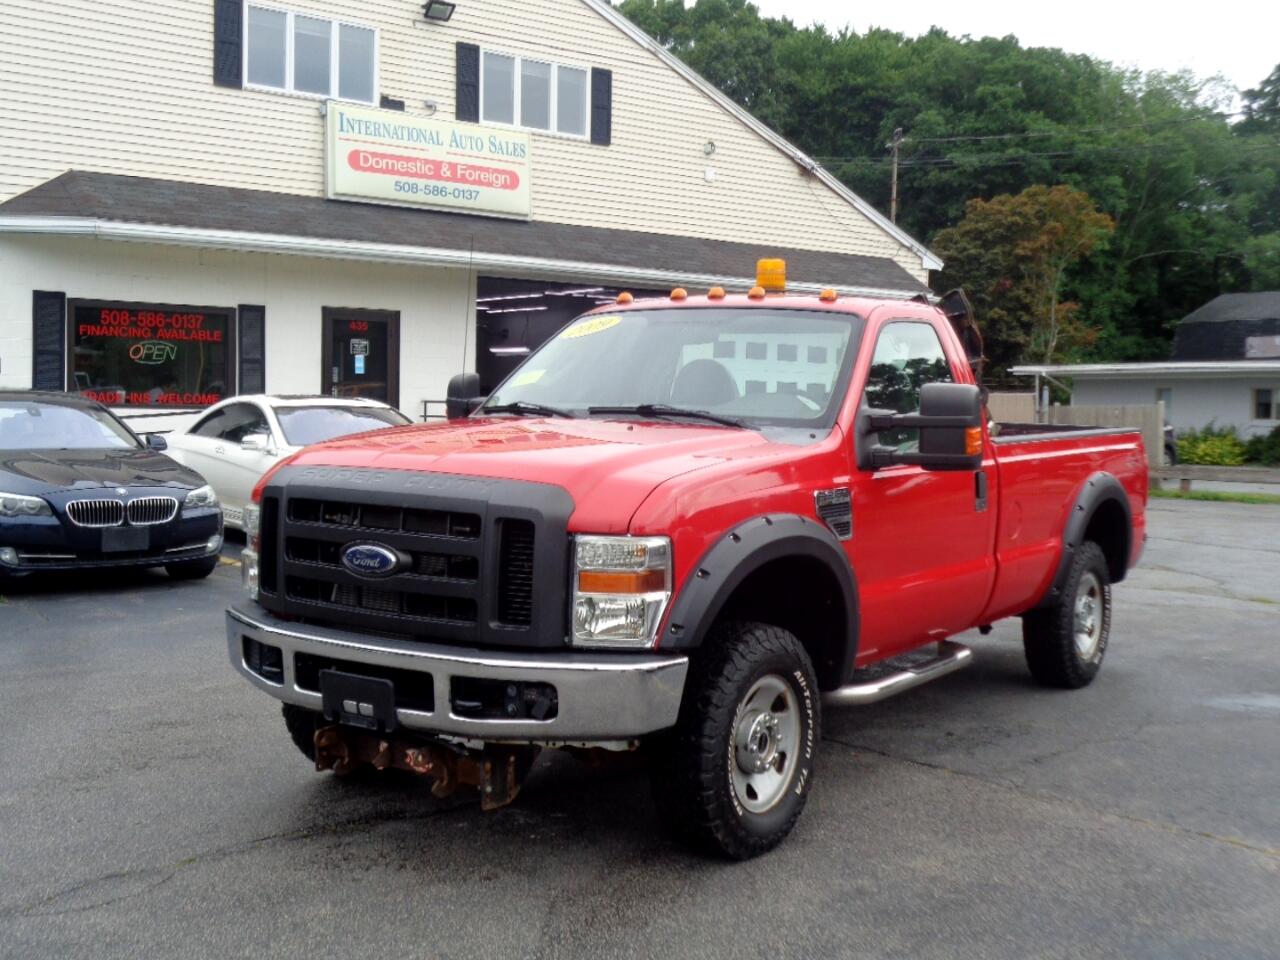 Buy Here Pay Here 2009 Ford F-250 SD XL 4WD for Sale in W Bridgewater 2009 Ford F 250 Engine 5.4 L V8 Towing Capacity